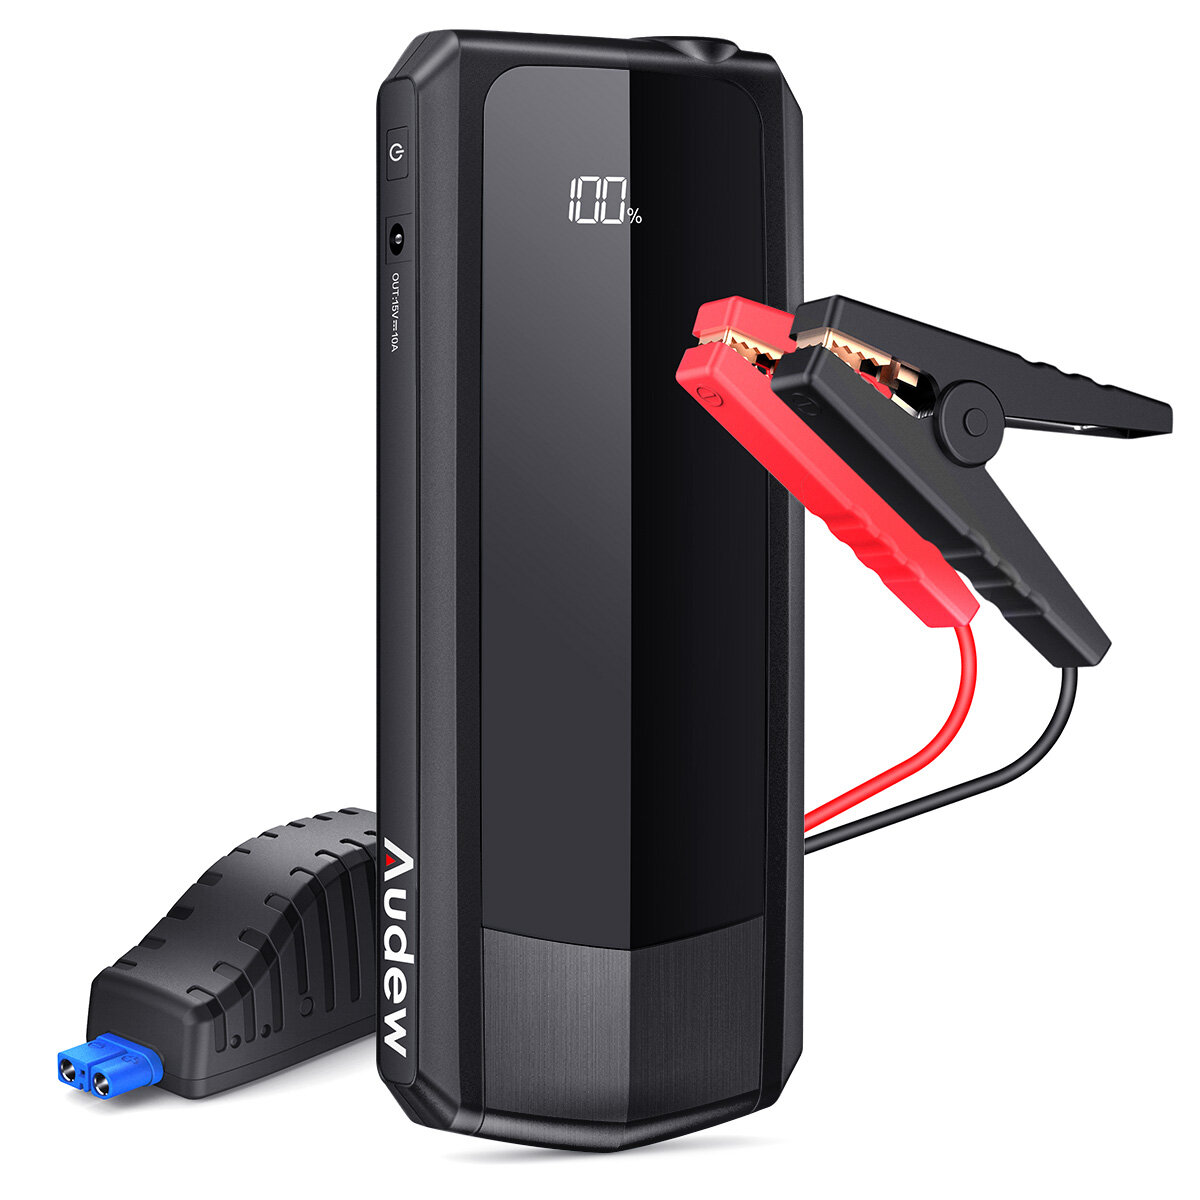 

AUDEW 2000A 20000mAh Car Jump Starter for All Gas Engines or Up To 8.5L Diesel with LCD Power Display Dual USB QC3.0 Cha